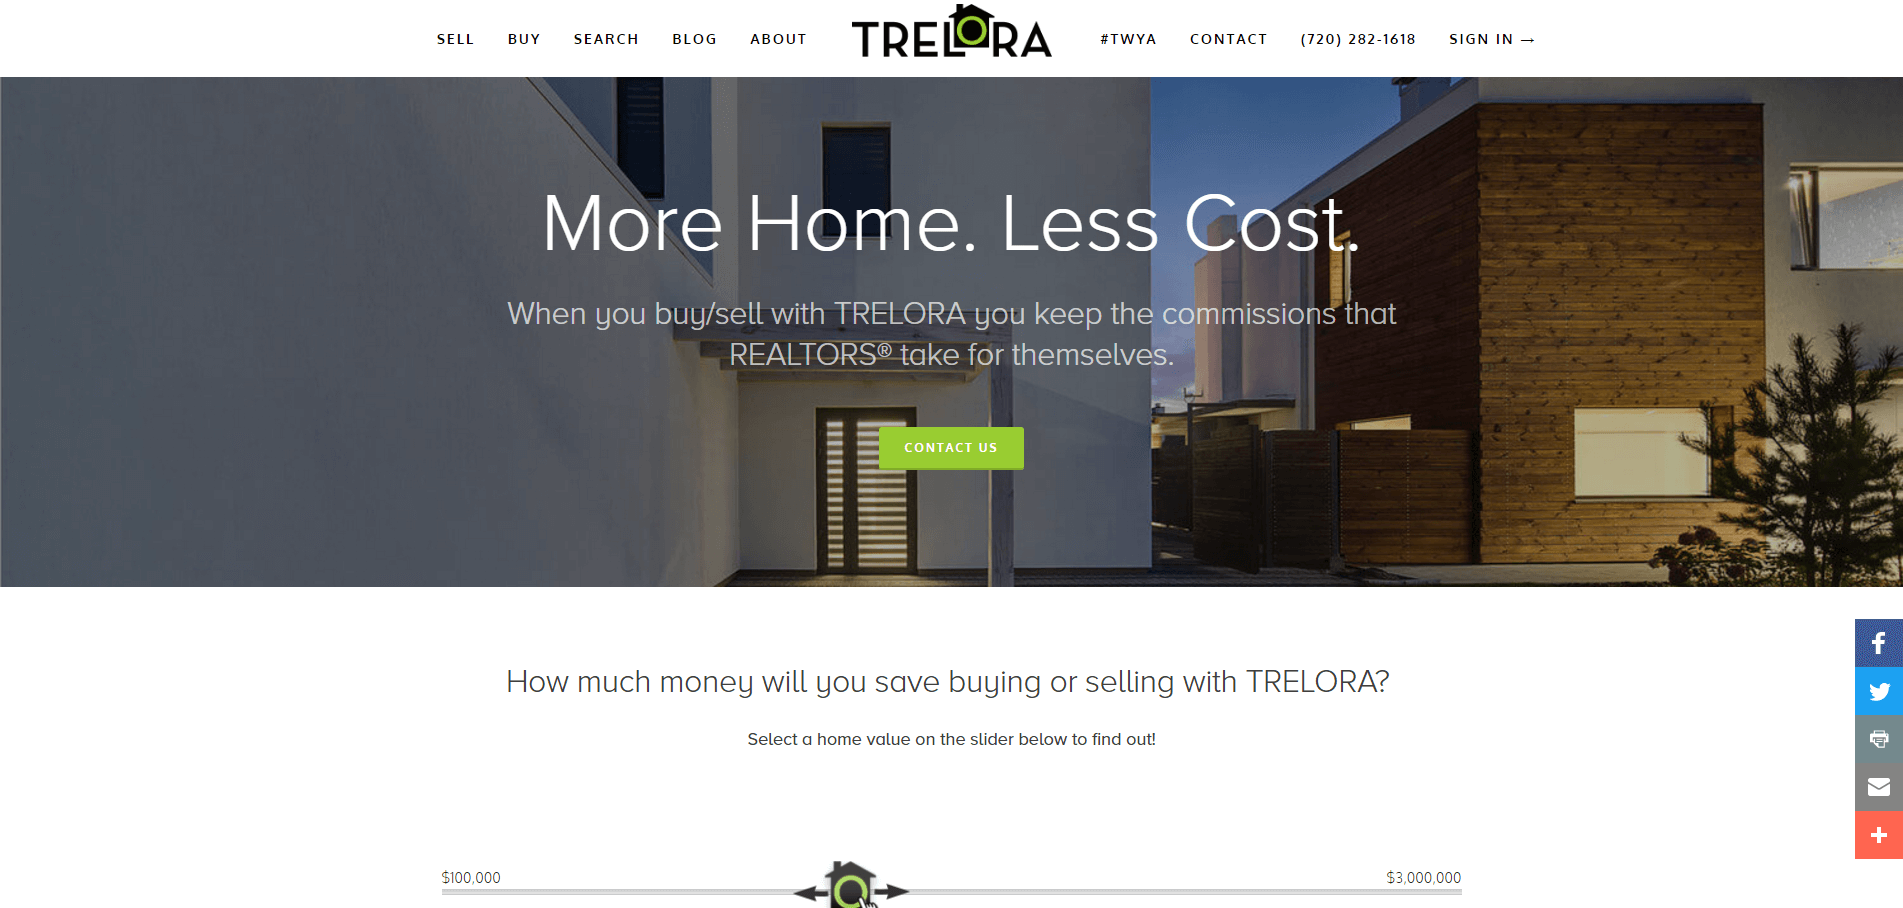  Awesome!  We listed 101 of the best real estate websites.  We reviewed each site and ranked them 1-101.  Here's trelora.com.  Curious who made the cut? 